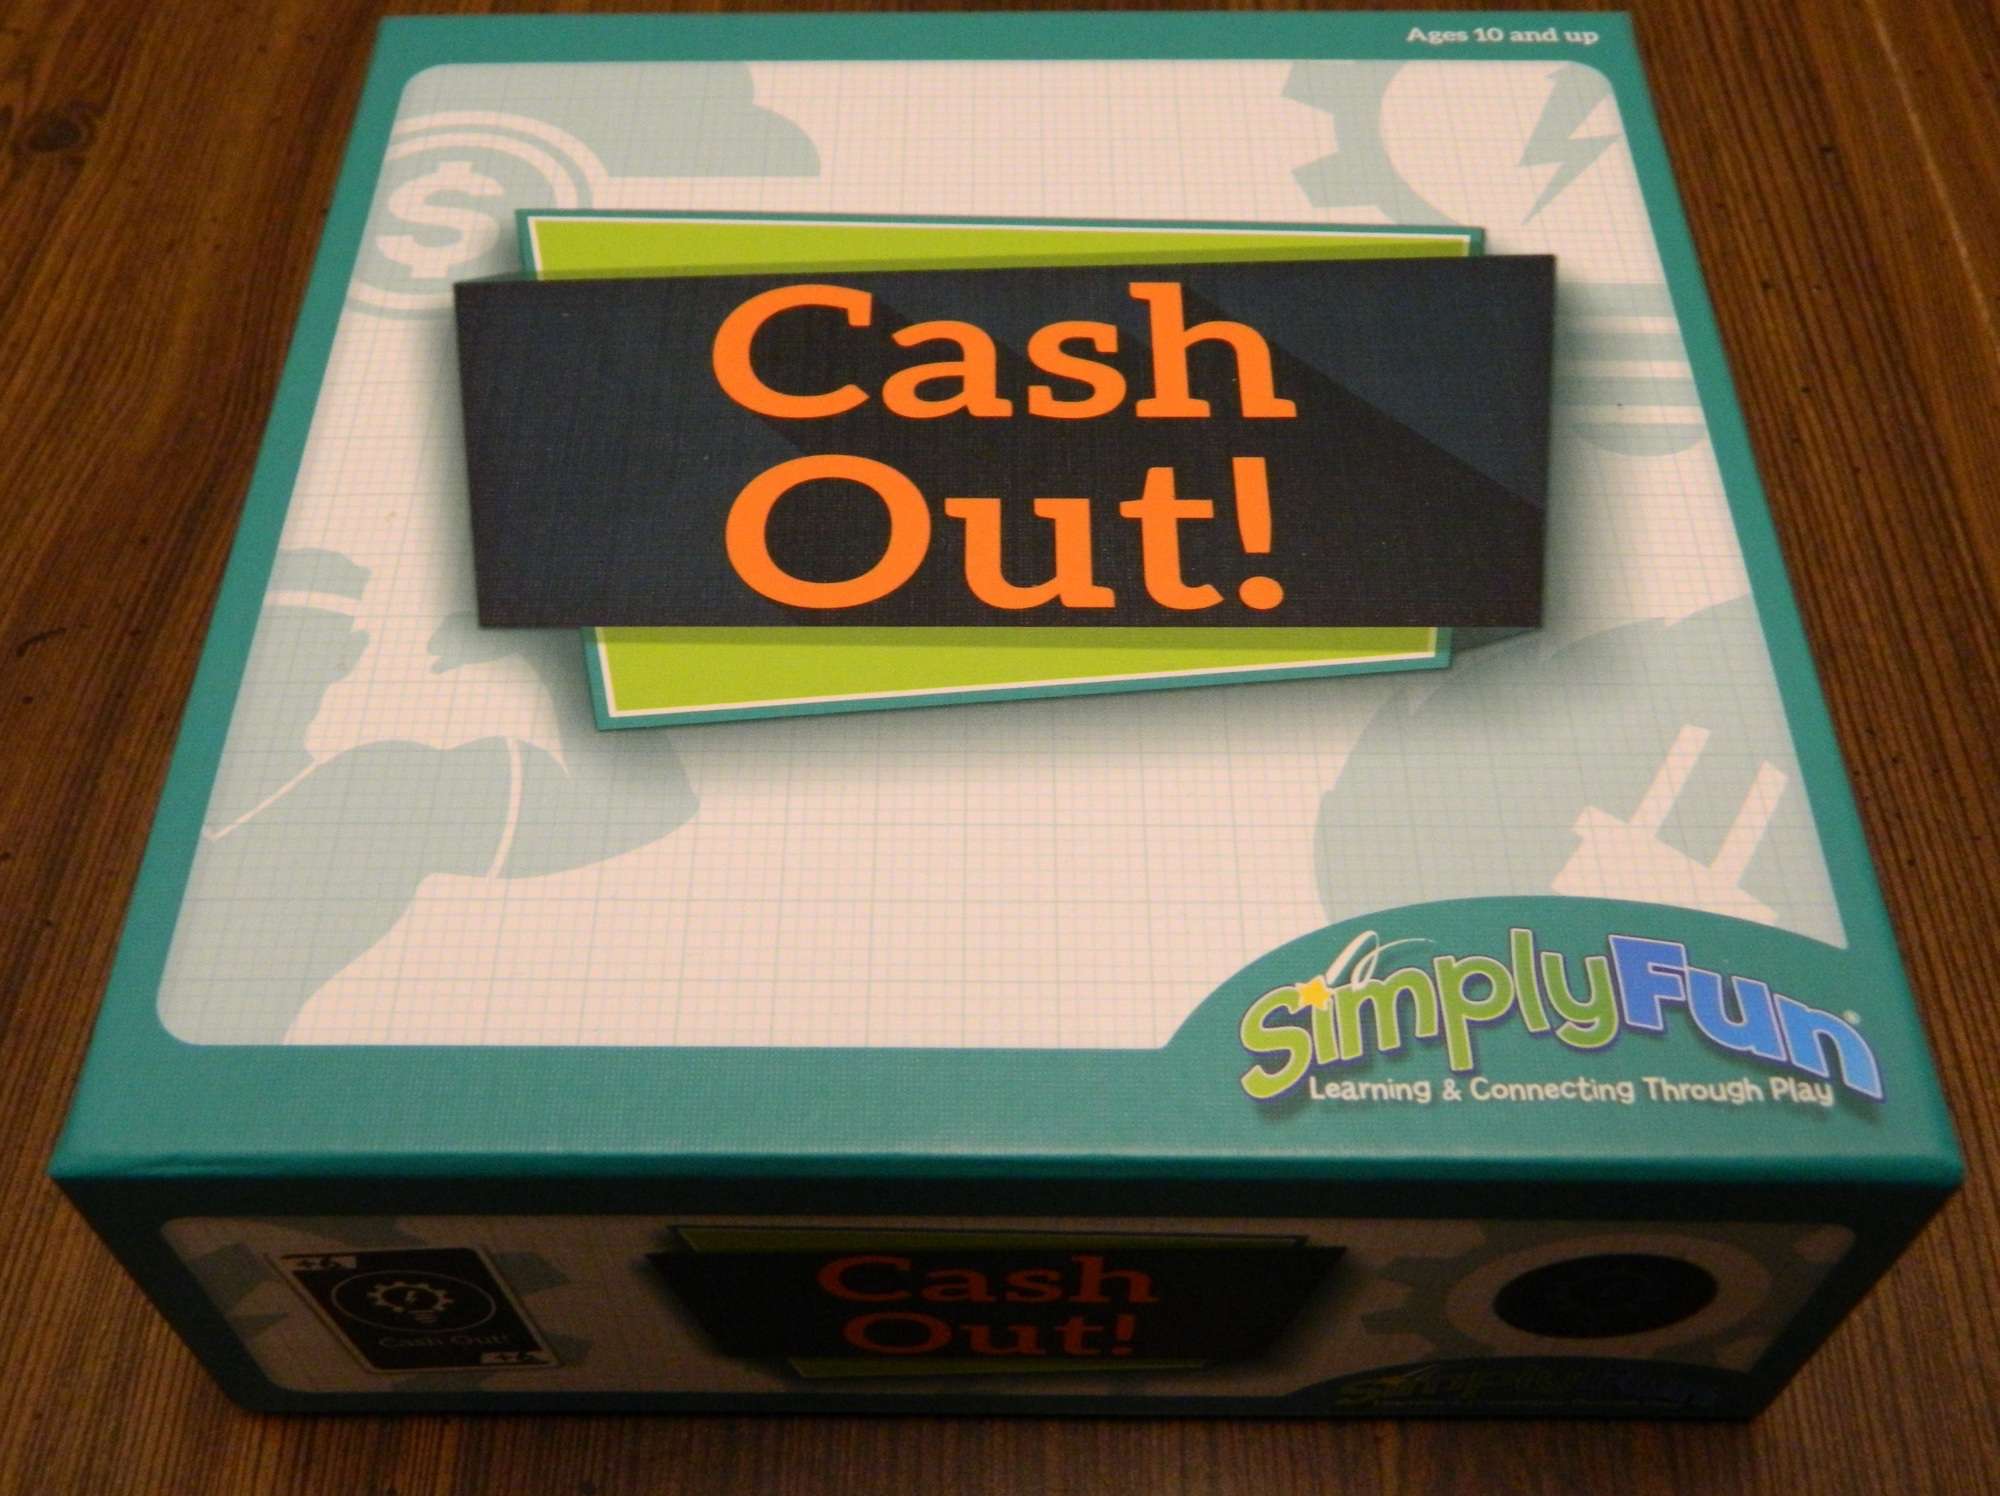 Cash Out! Card Game Review and Instructions